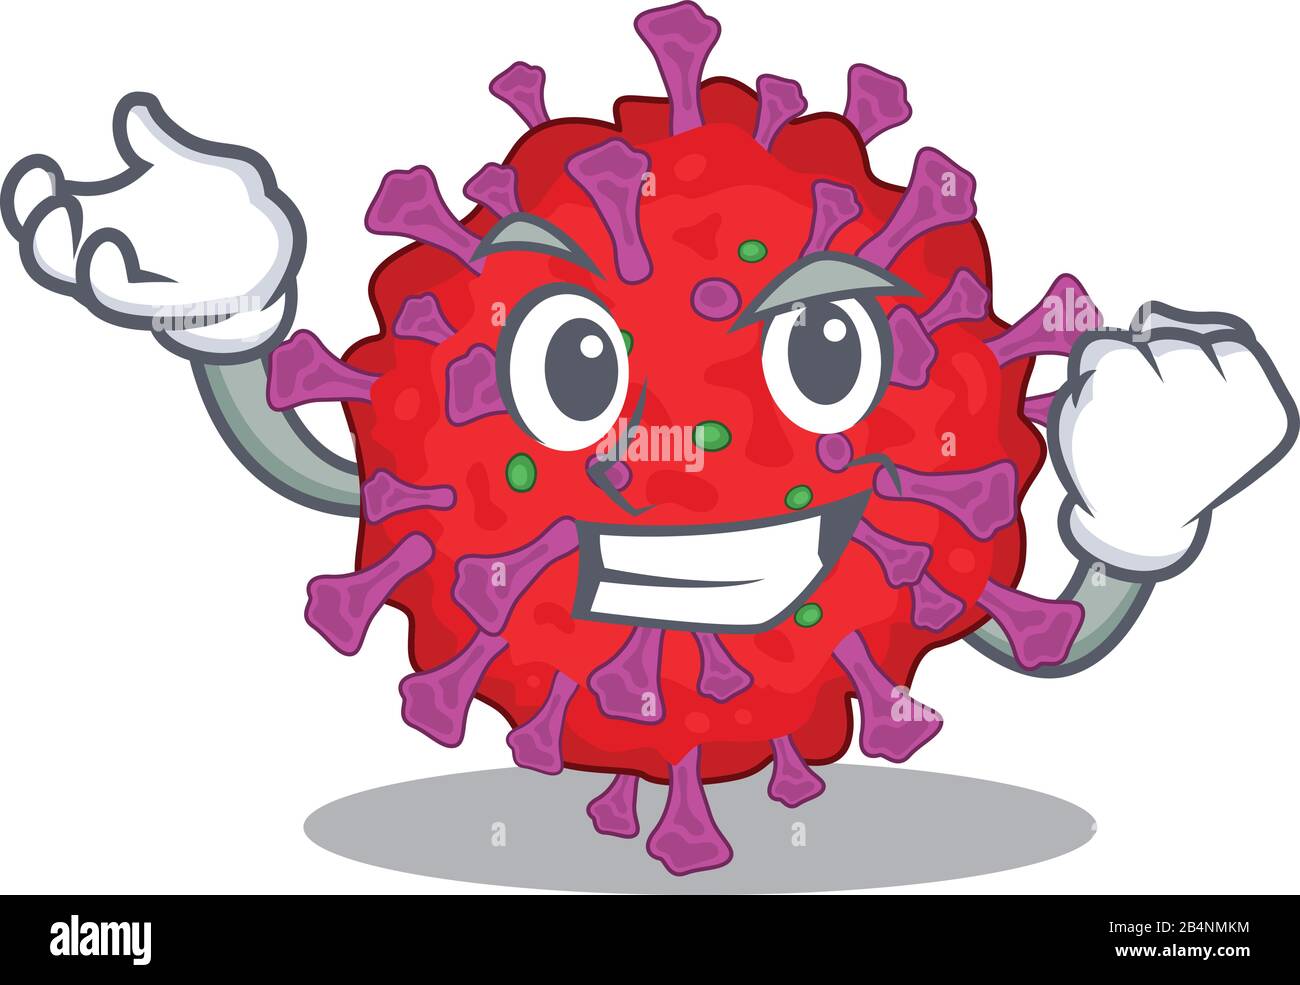 Coronavirus particle cartoon character style with happy face Stock Vector